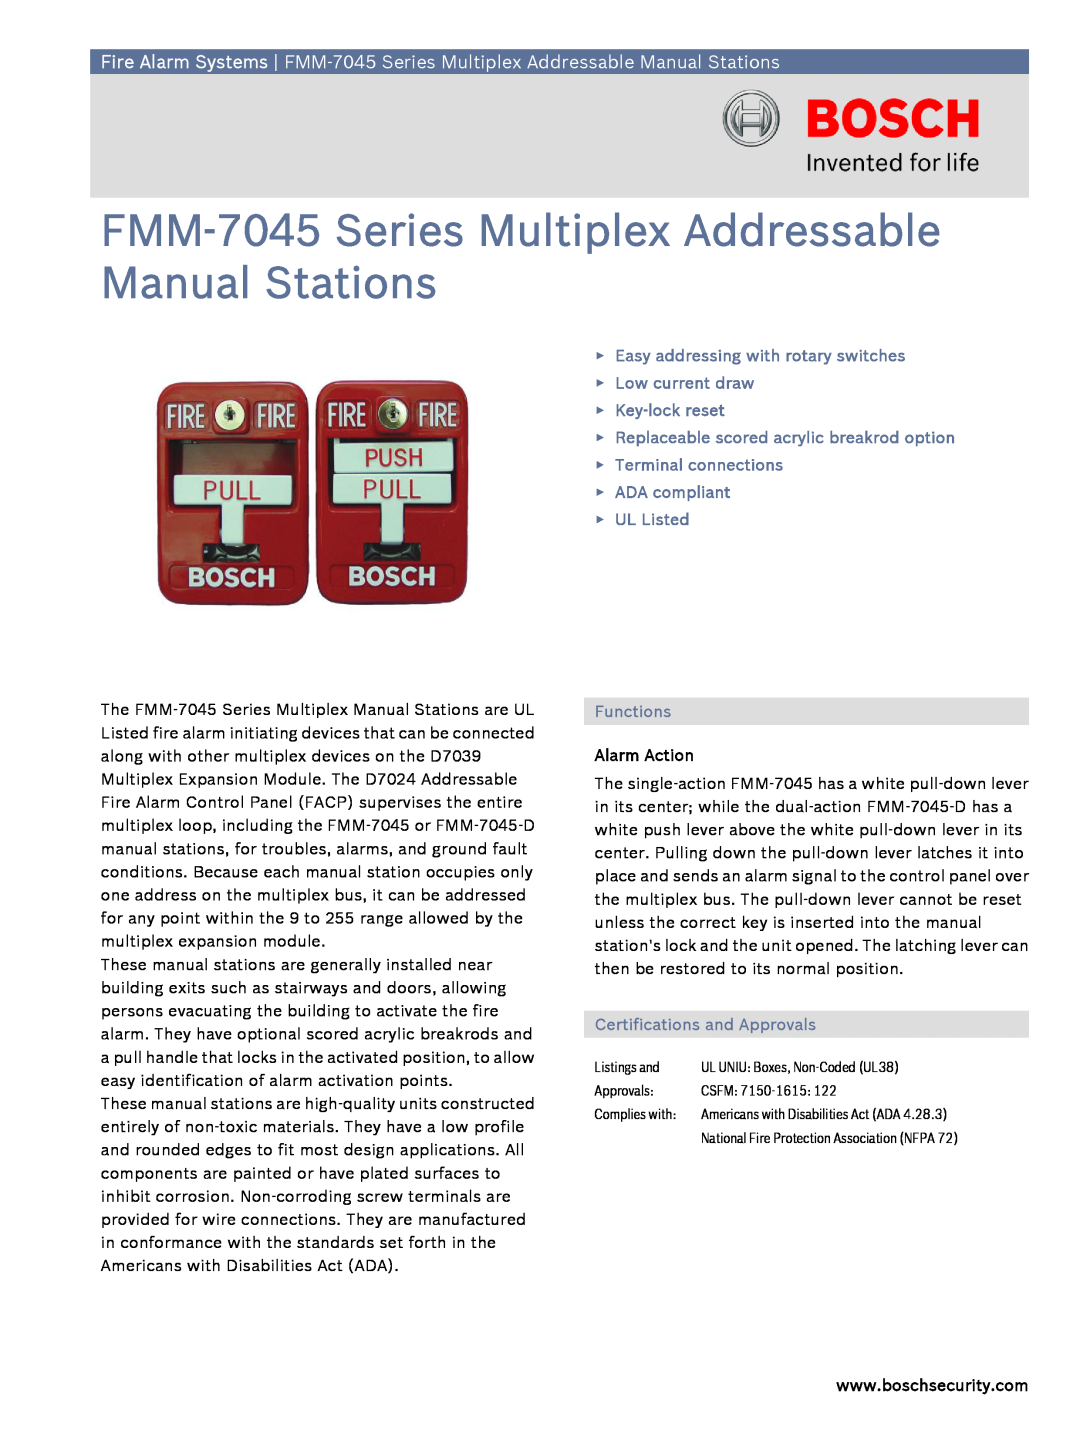 Bosch Appliances FMM-7045 Series manual Easy addressing with rotary switches Low current draw Key-lock reset, Alarm Action 